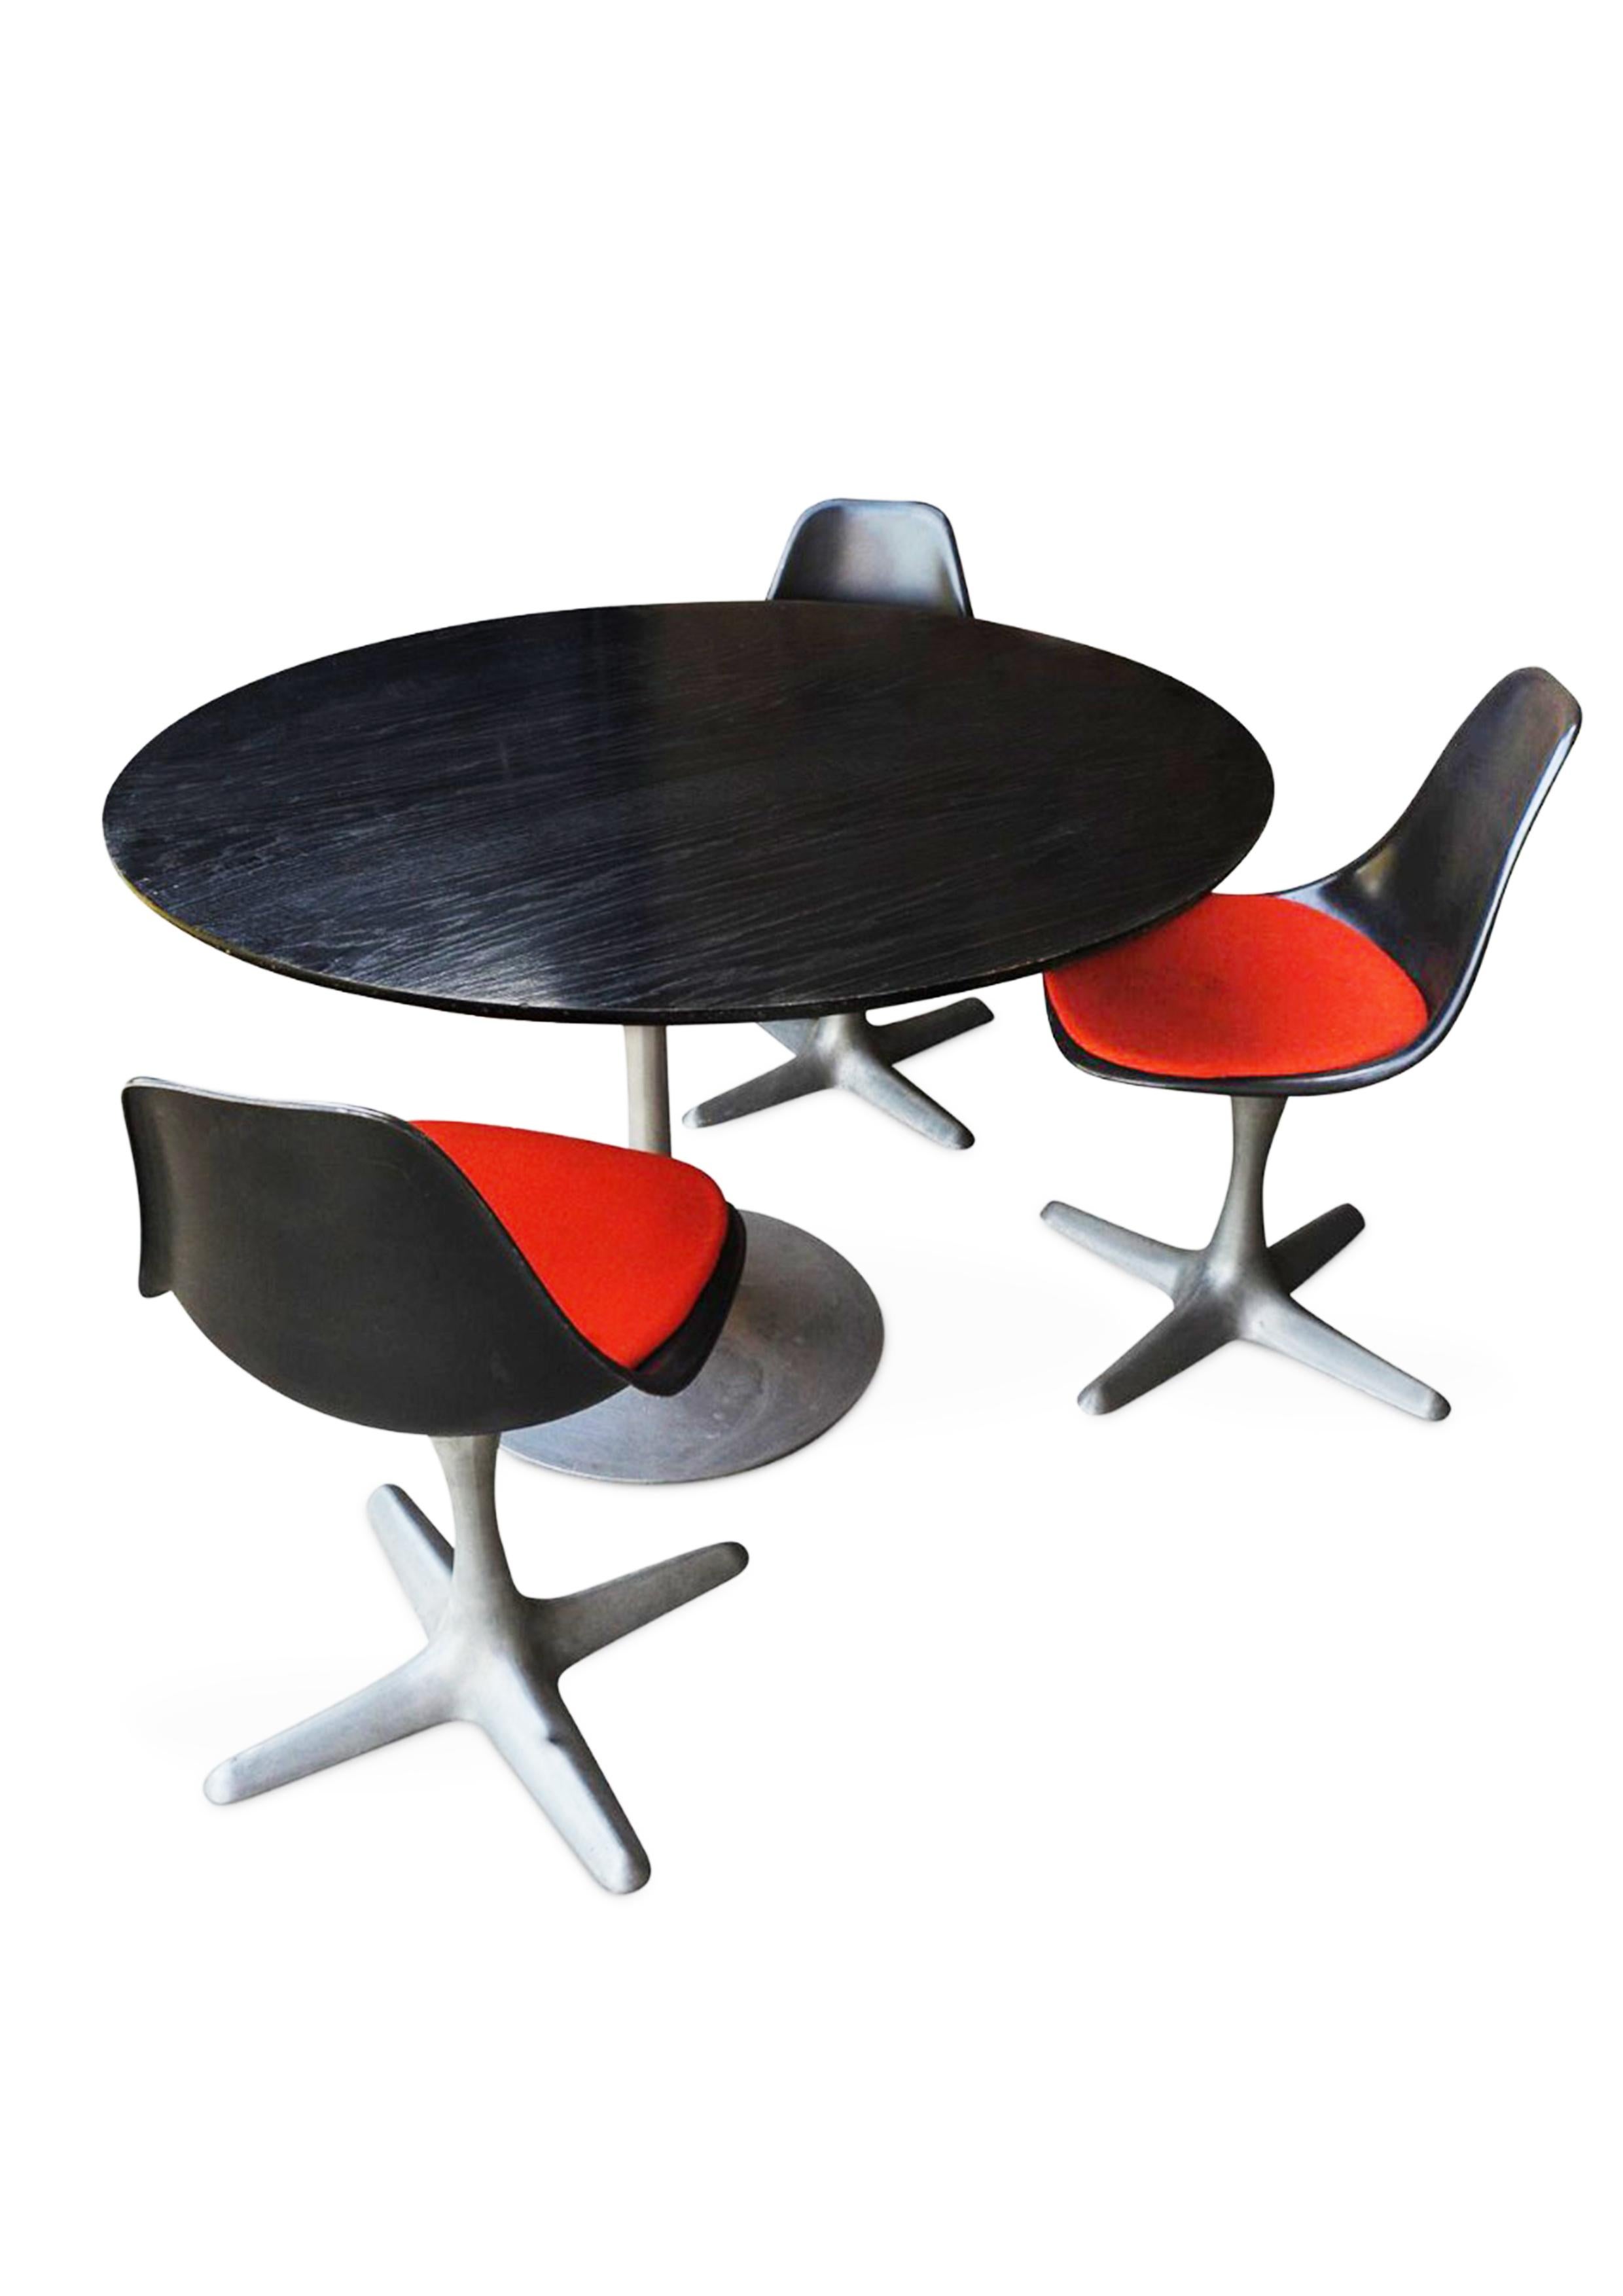 An Original & Rare Black Ash & Aluminium Arkana Circular Dining Table
With Three Black & Orange Matching Tulip Model 115 Dining Chairs 

Engraved with makers mark to base of chairs legs.

Inspired by the Tulip Table by designer Eero Saarinen, the